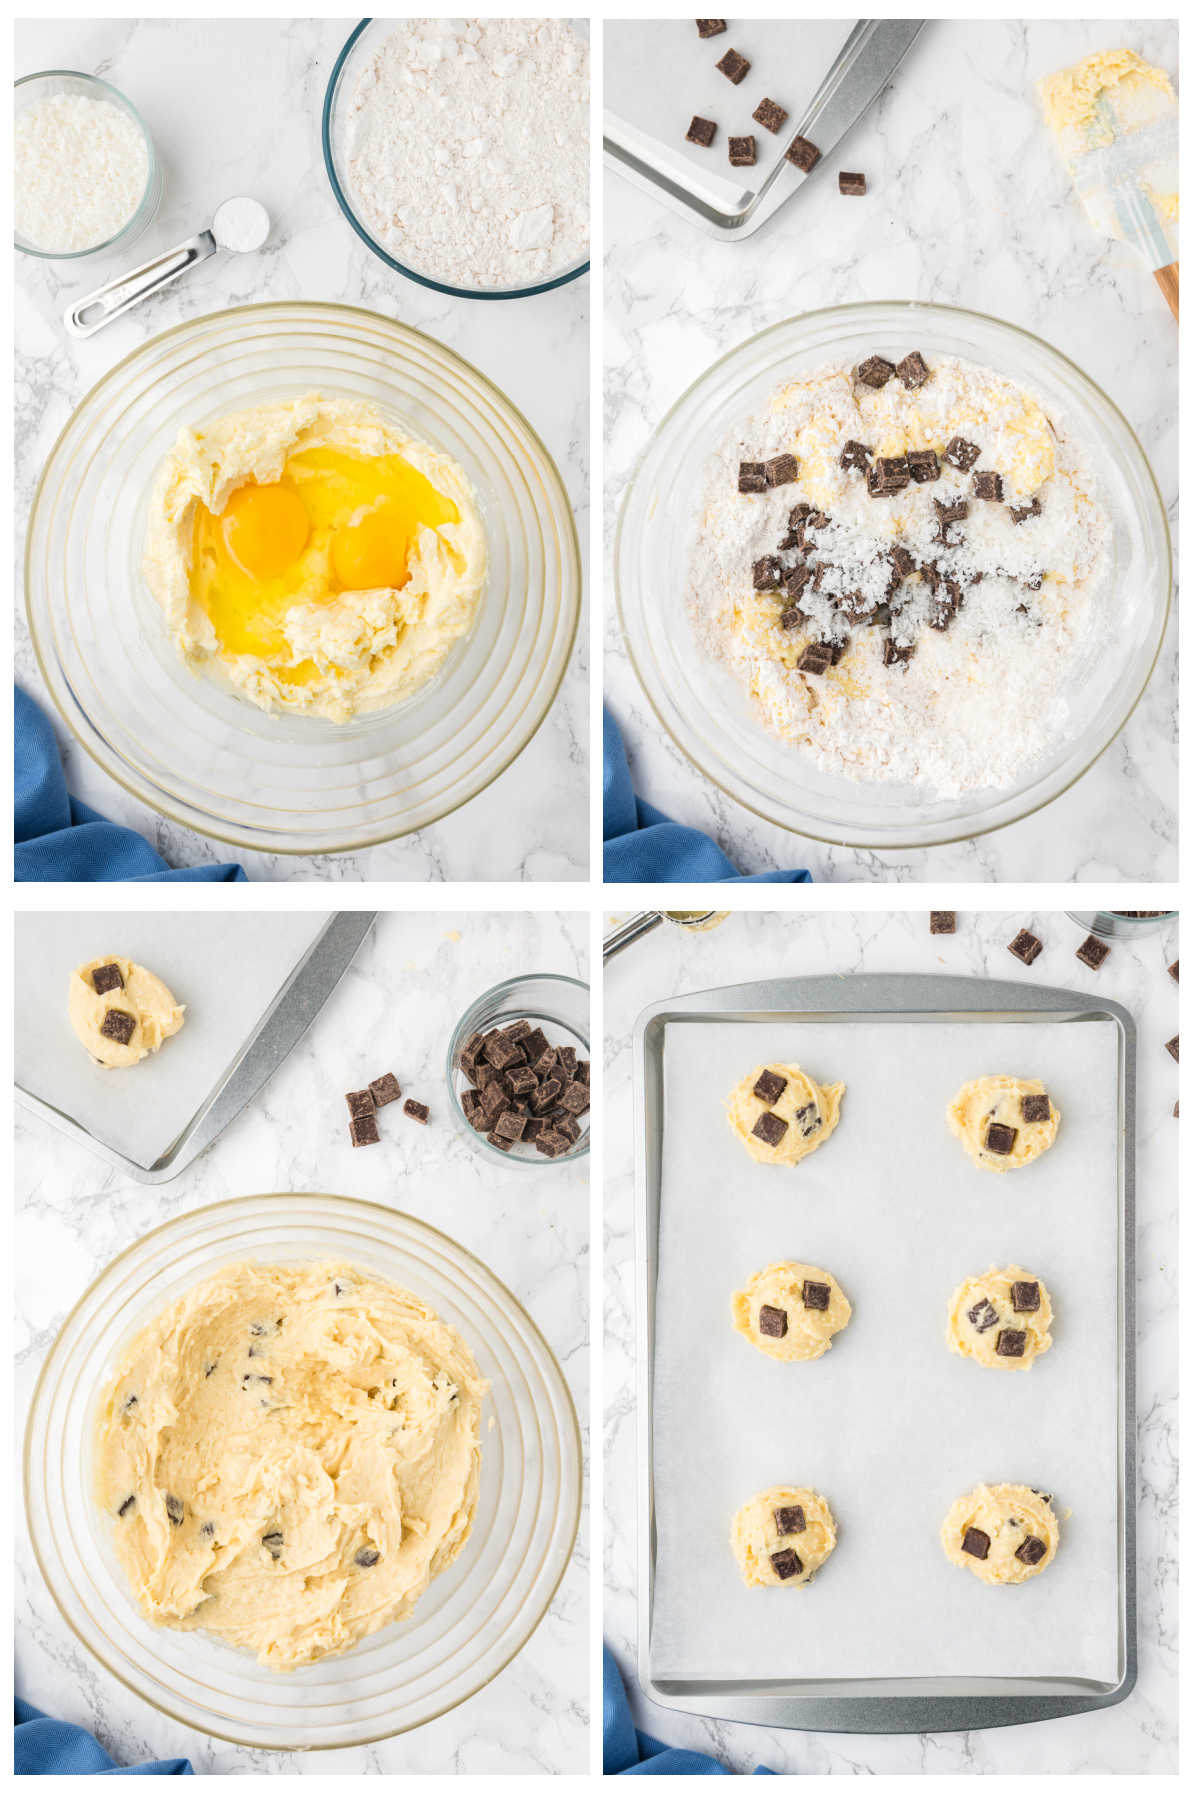 Step by step images showing how to make coconut chocolate chip cookies.